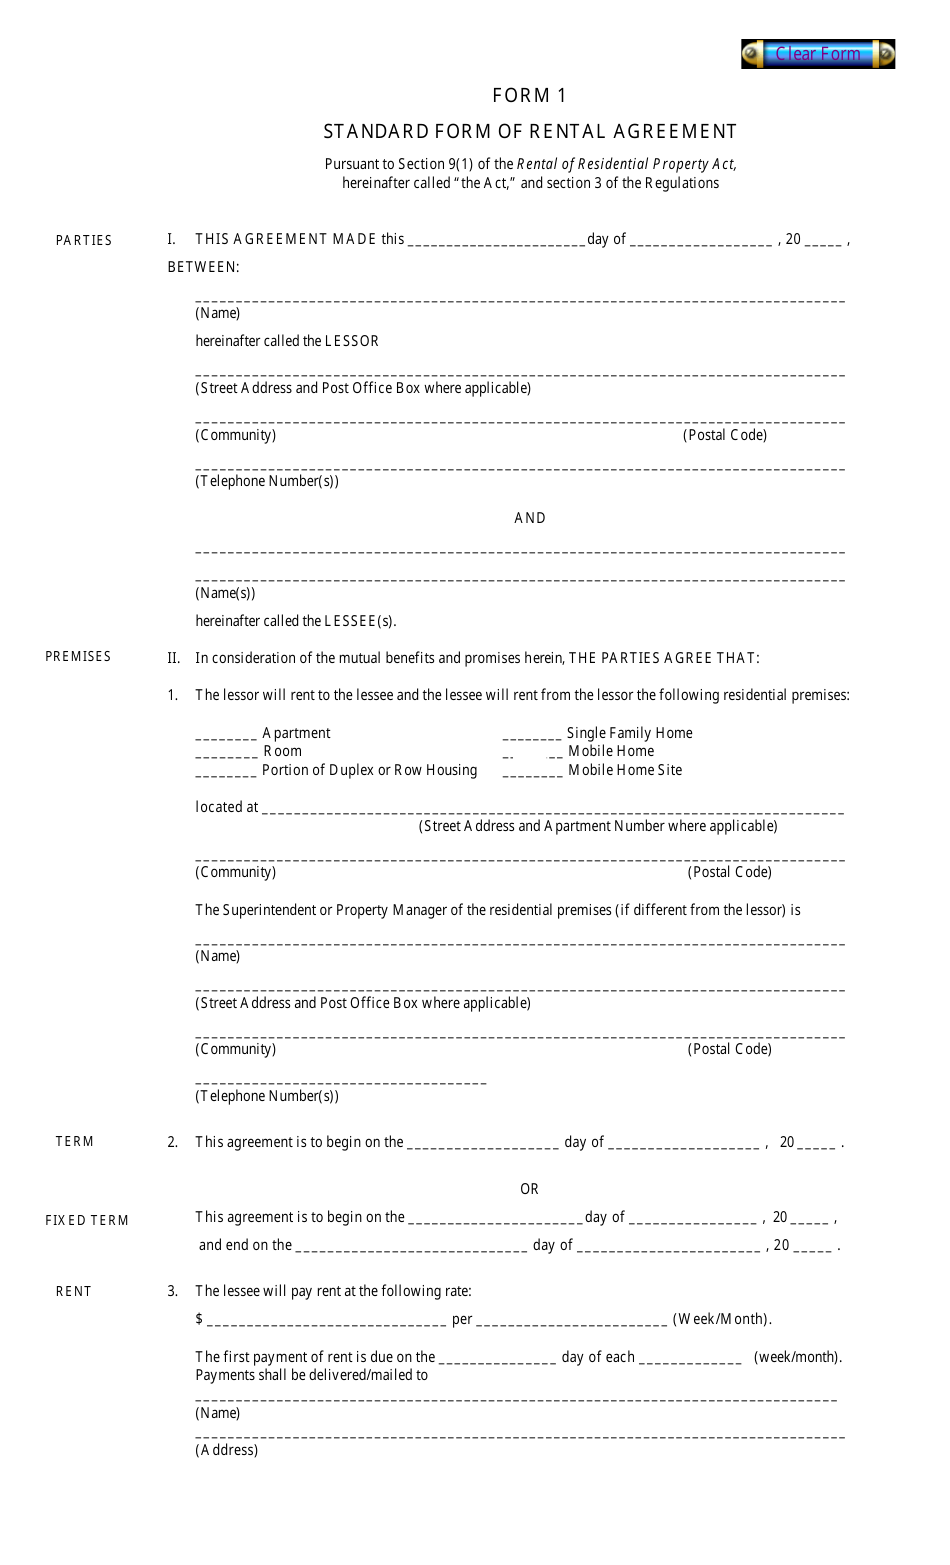 Standard Form of Rental Agreement, Page 1